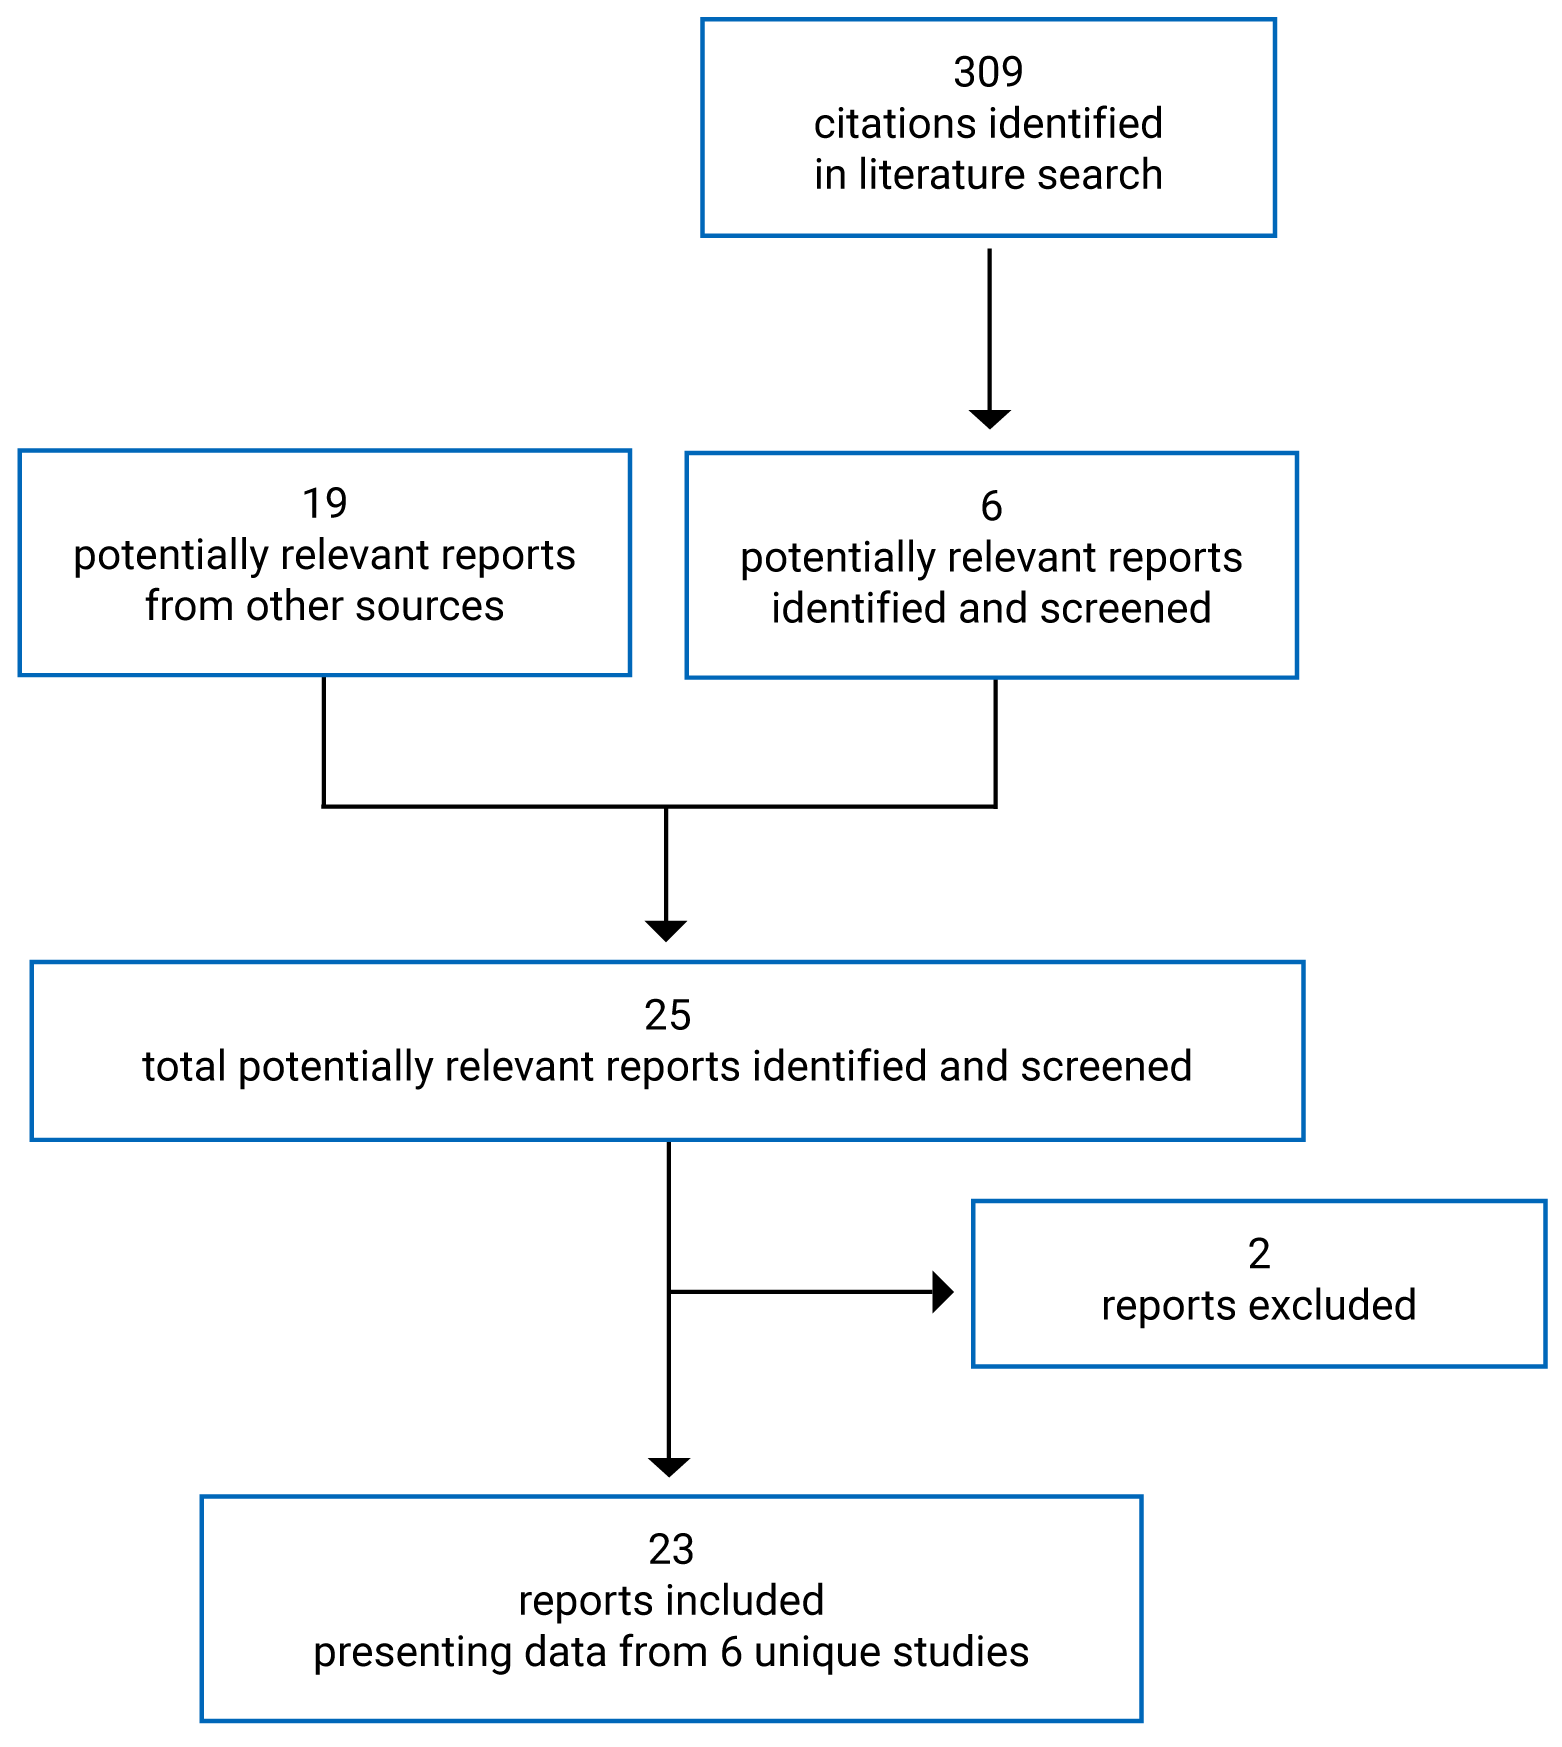 309 citations were identified in the literature search; 6 articles were screened for inclusion and 2 were excluded. An additional 20 reports were identified from grey literature reports and the sponsor’s application. In total, 24 reports related to 6 studies were included in the systematic review.